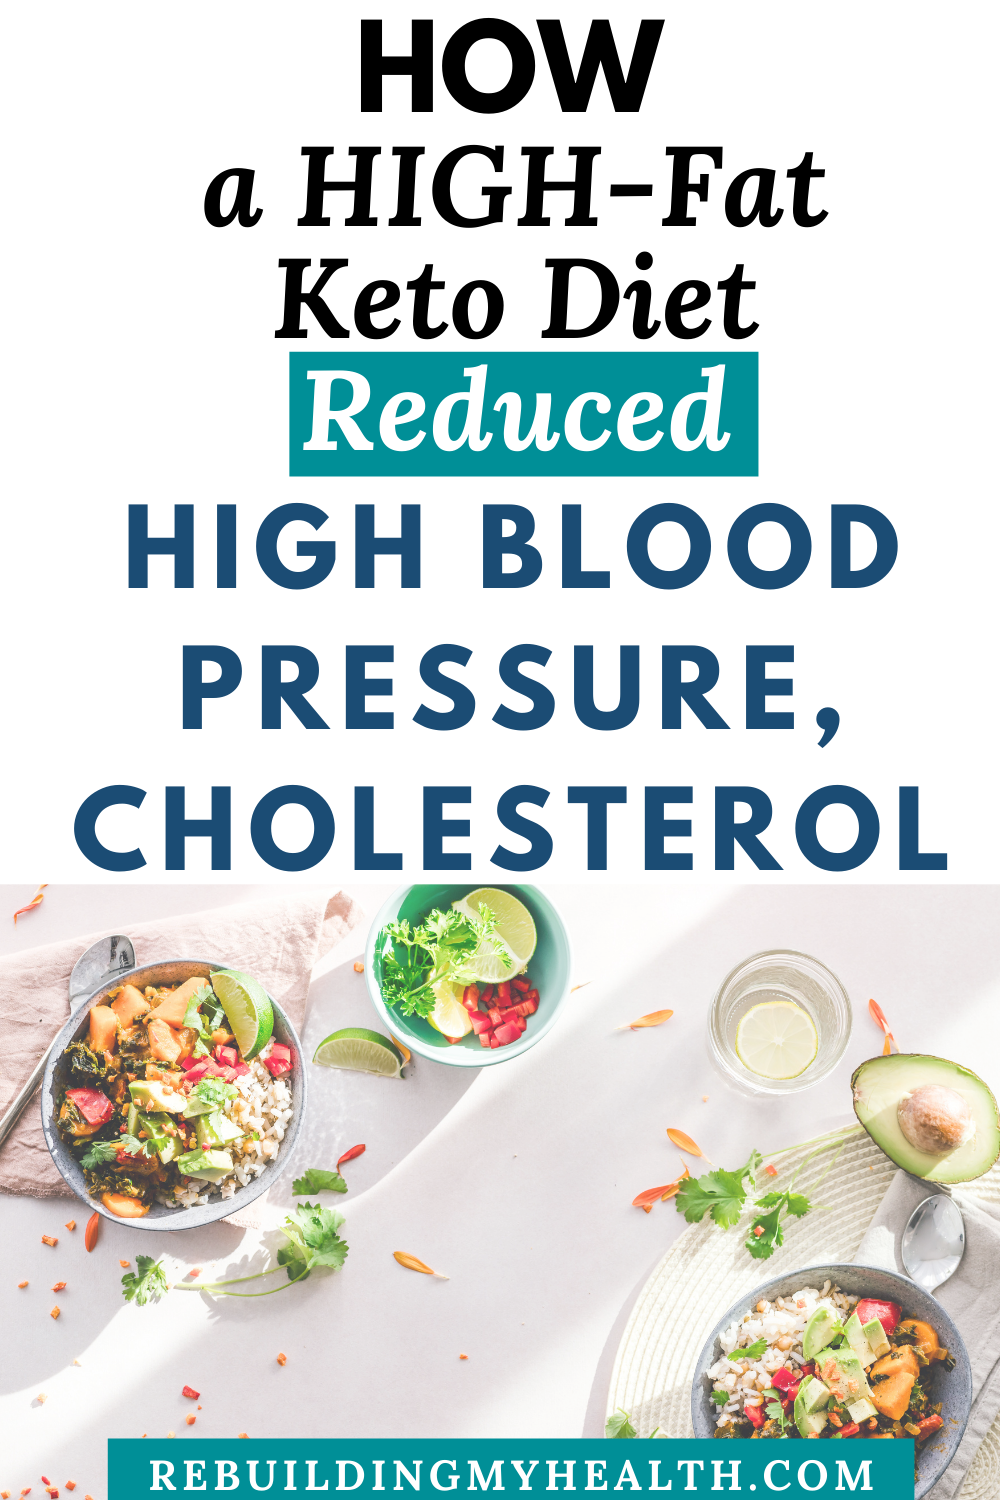 A North Carolina nurse and mom reduces her high blood pressure and cholesterol with a high-fat keto diet, while enjoying more energy, focus and clearer skin.